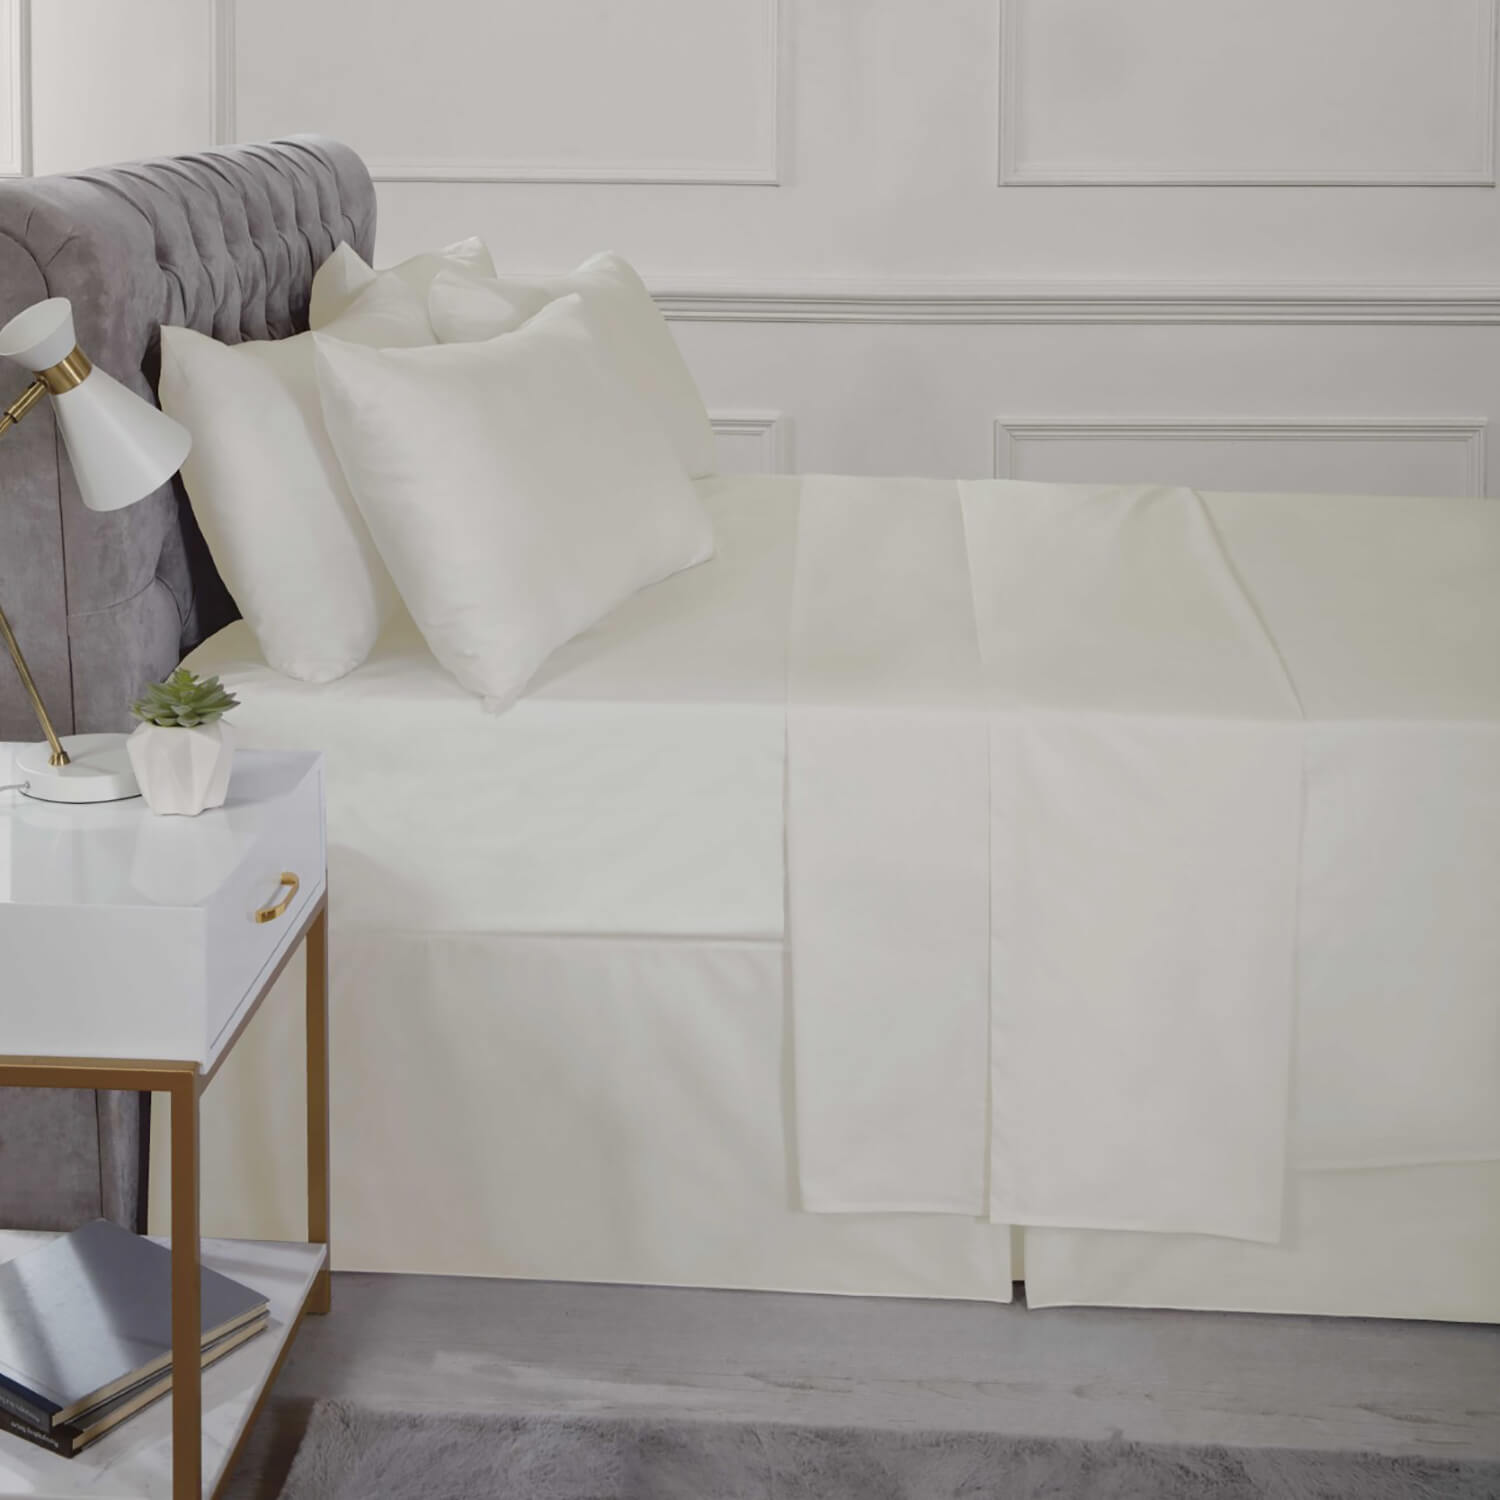 The Home Bedroom Easy Care Percale Box Valance Sheet - Cream 1 Shaws Department Stores